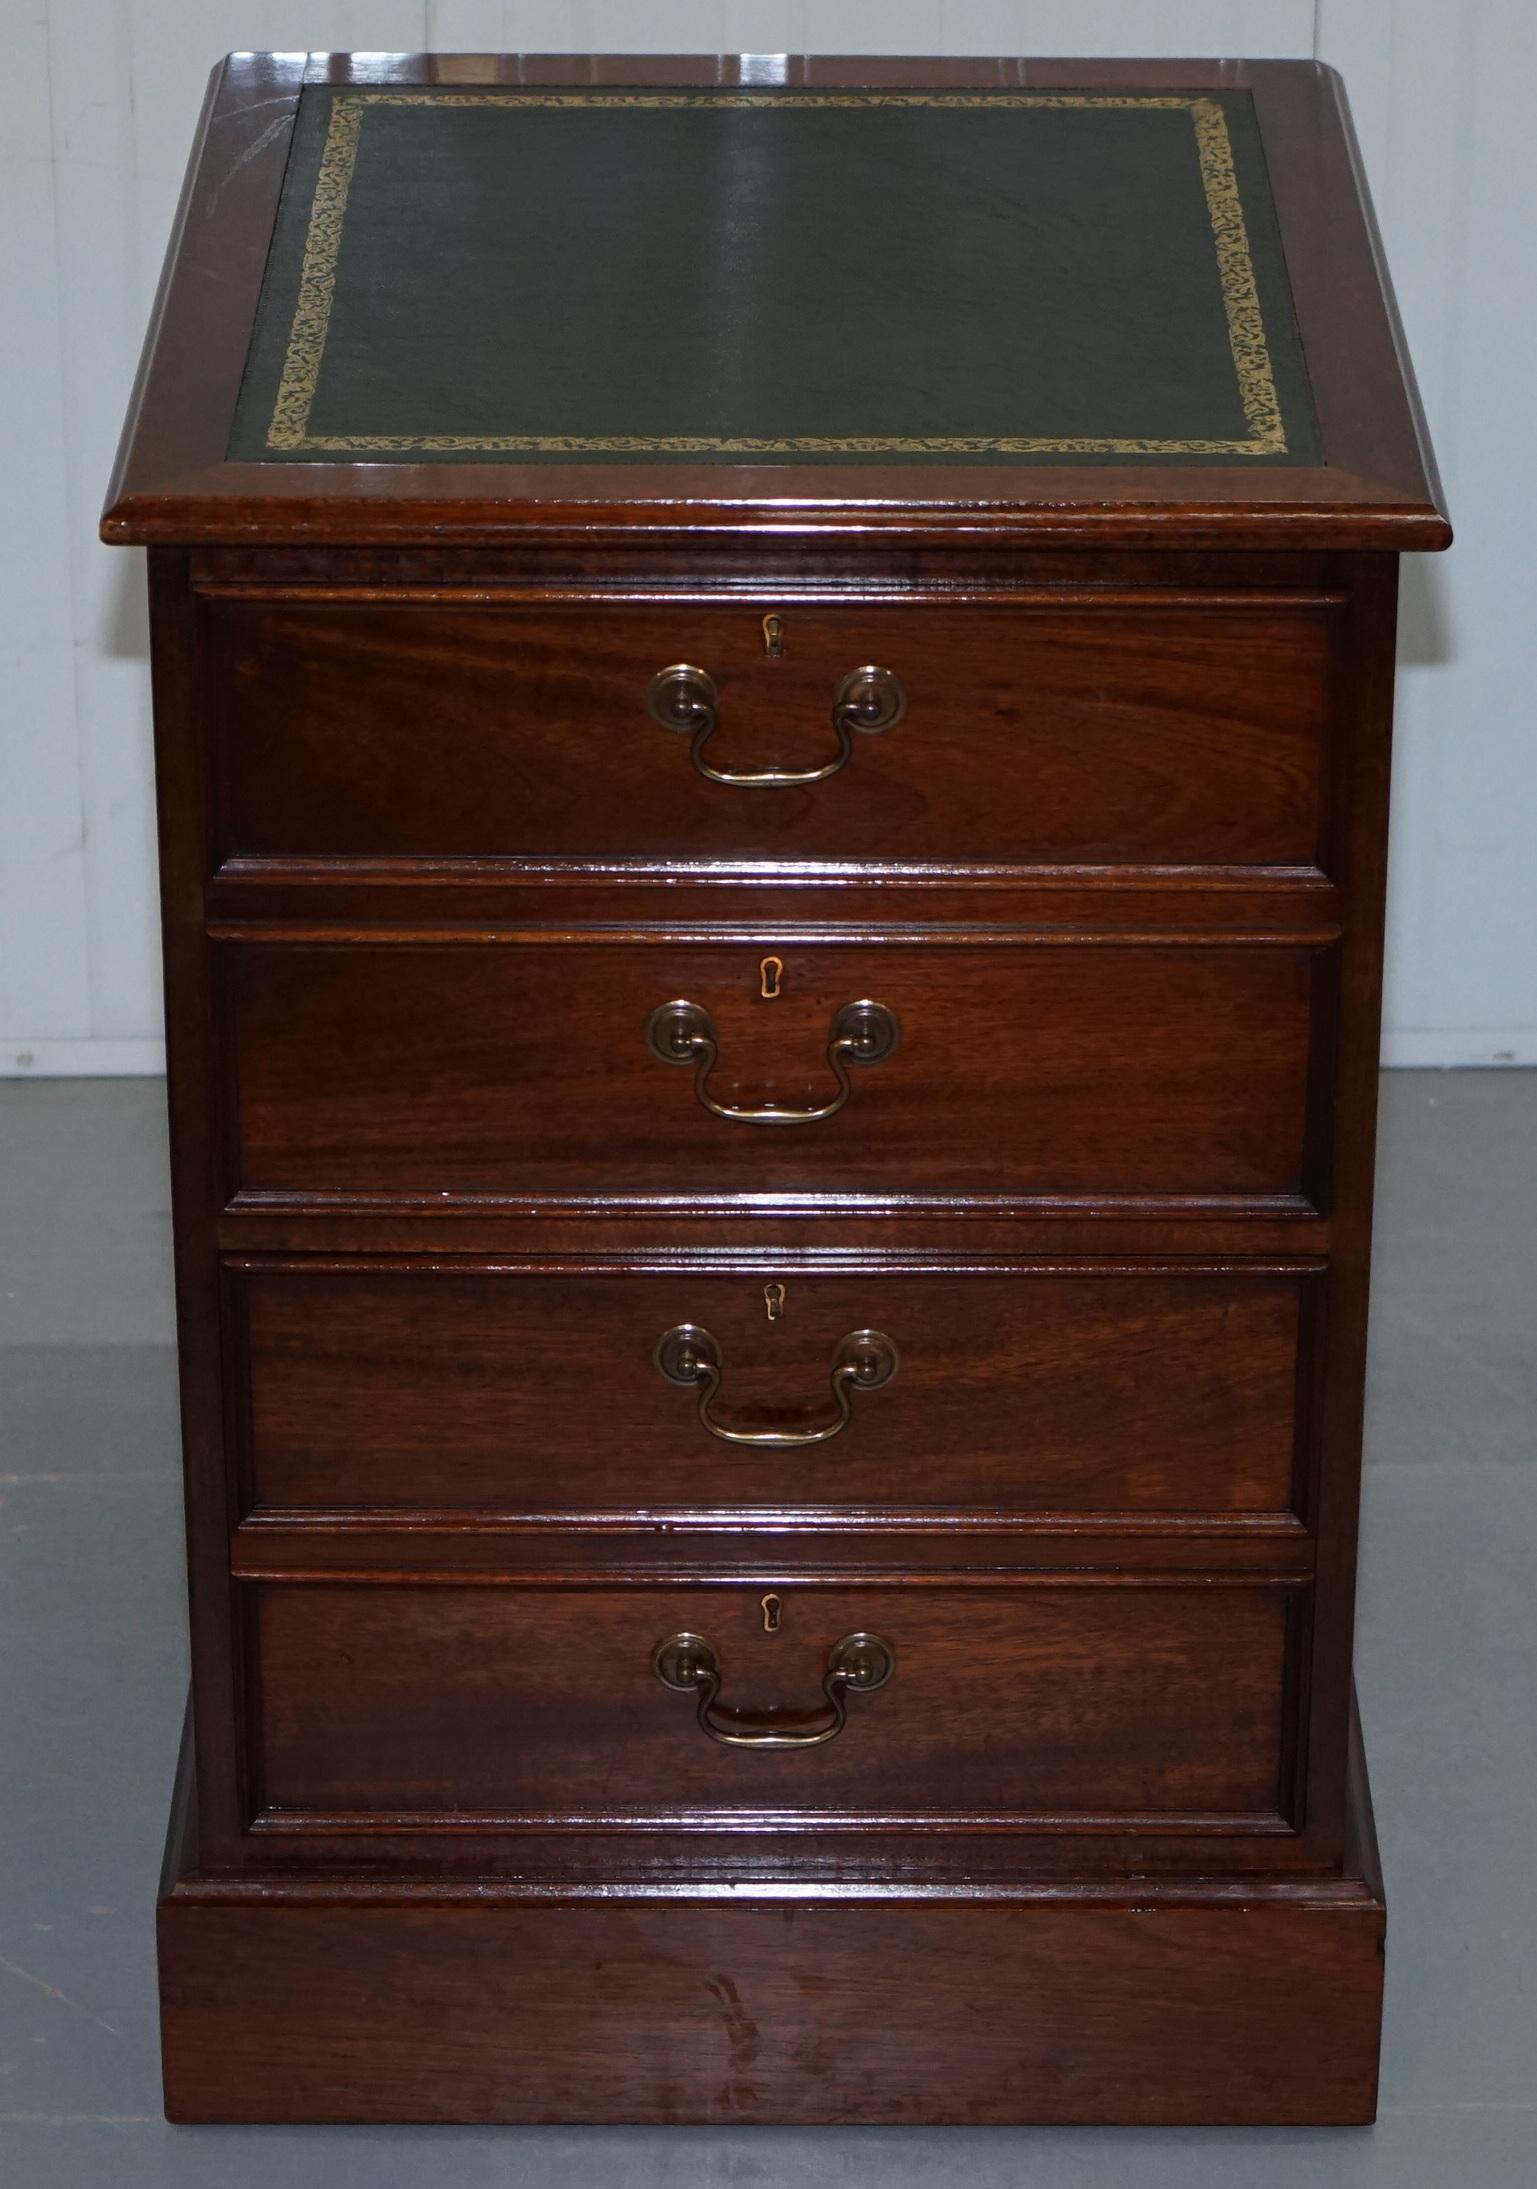 We are delighted to offer for sale this lovely mahogany with green leather writing surface filing cabinet

I have the matching desk for this filing cabinet listed under my other items

The green leather writing surface is gold tooled and it has